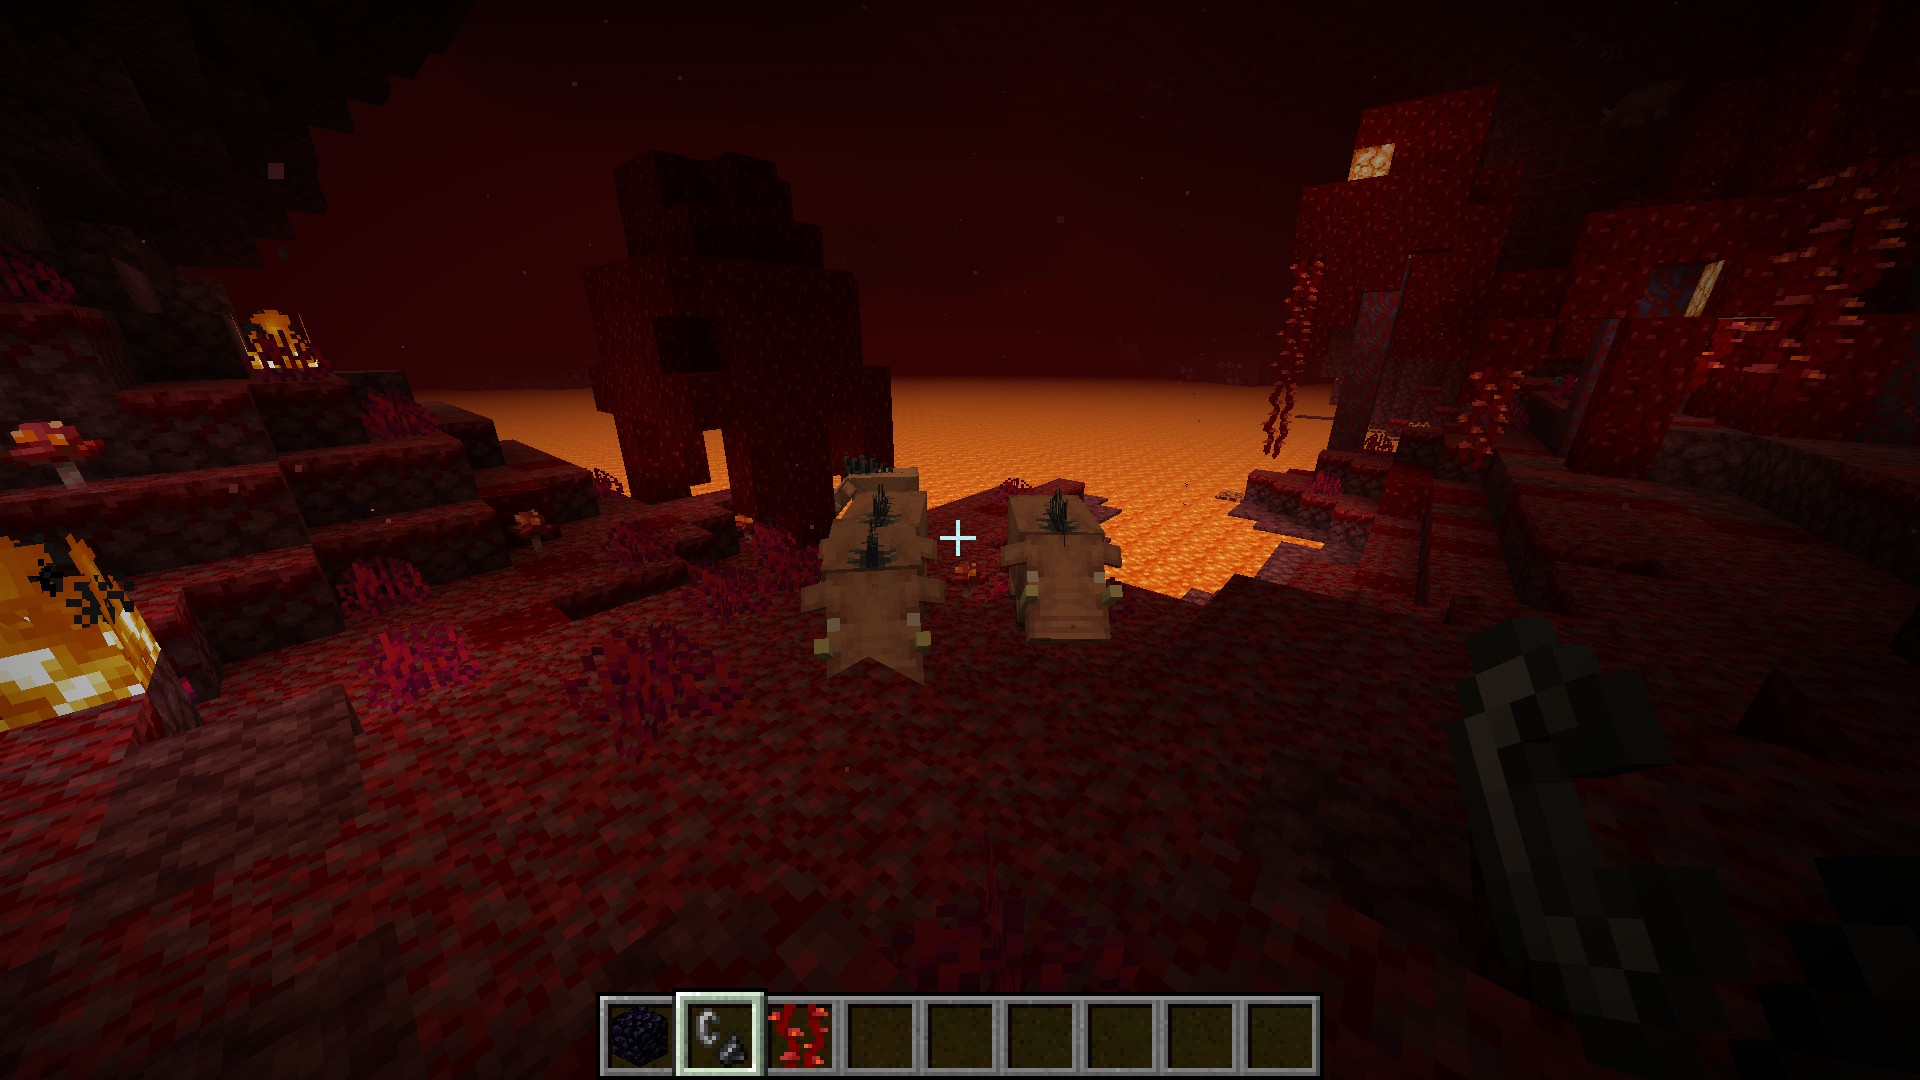 Minecraft releases Nether Update 1.16 snapshot with new biomes